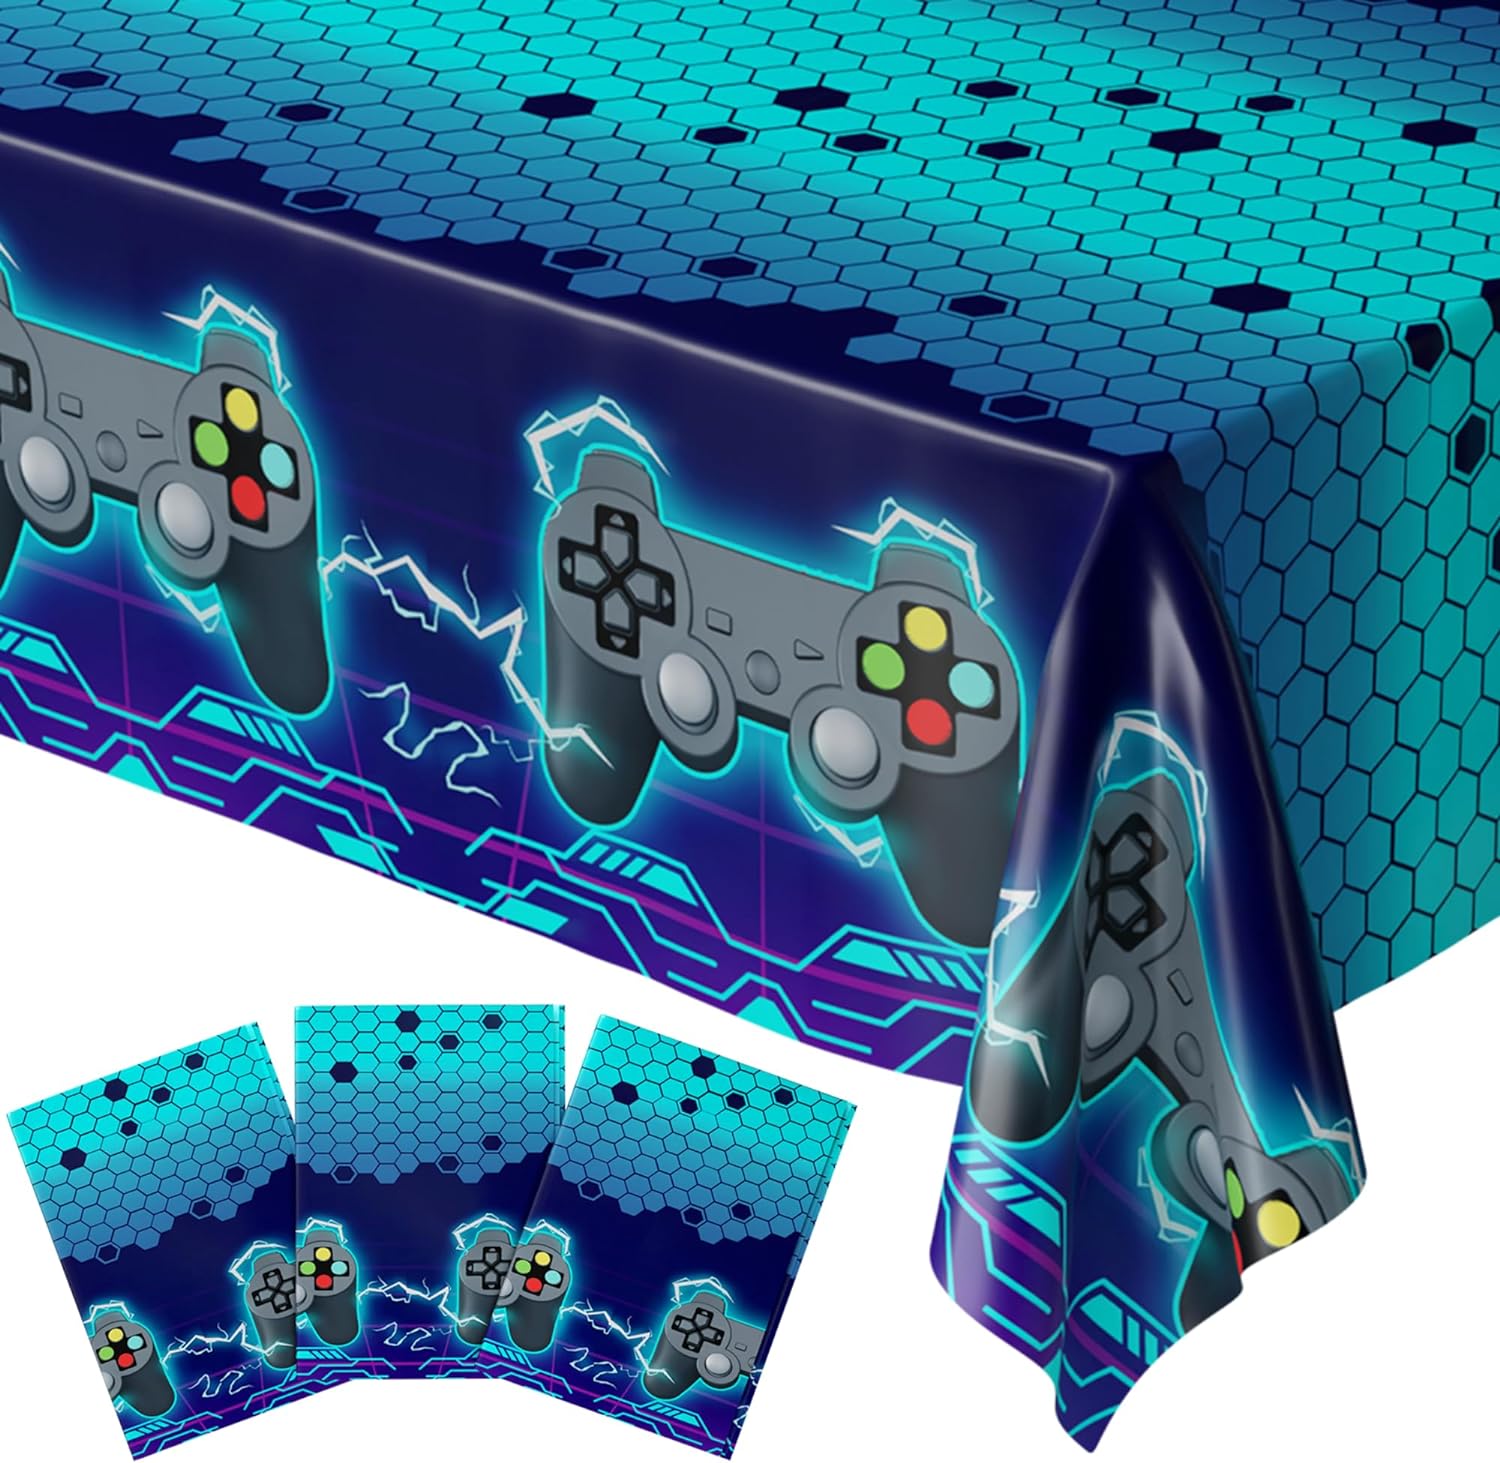 Video Game Table Cover (Neon Blue) - Pack of 3-54"x108" XL